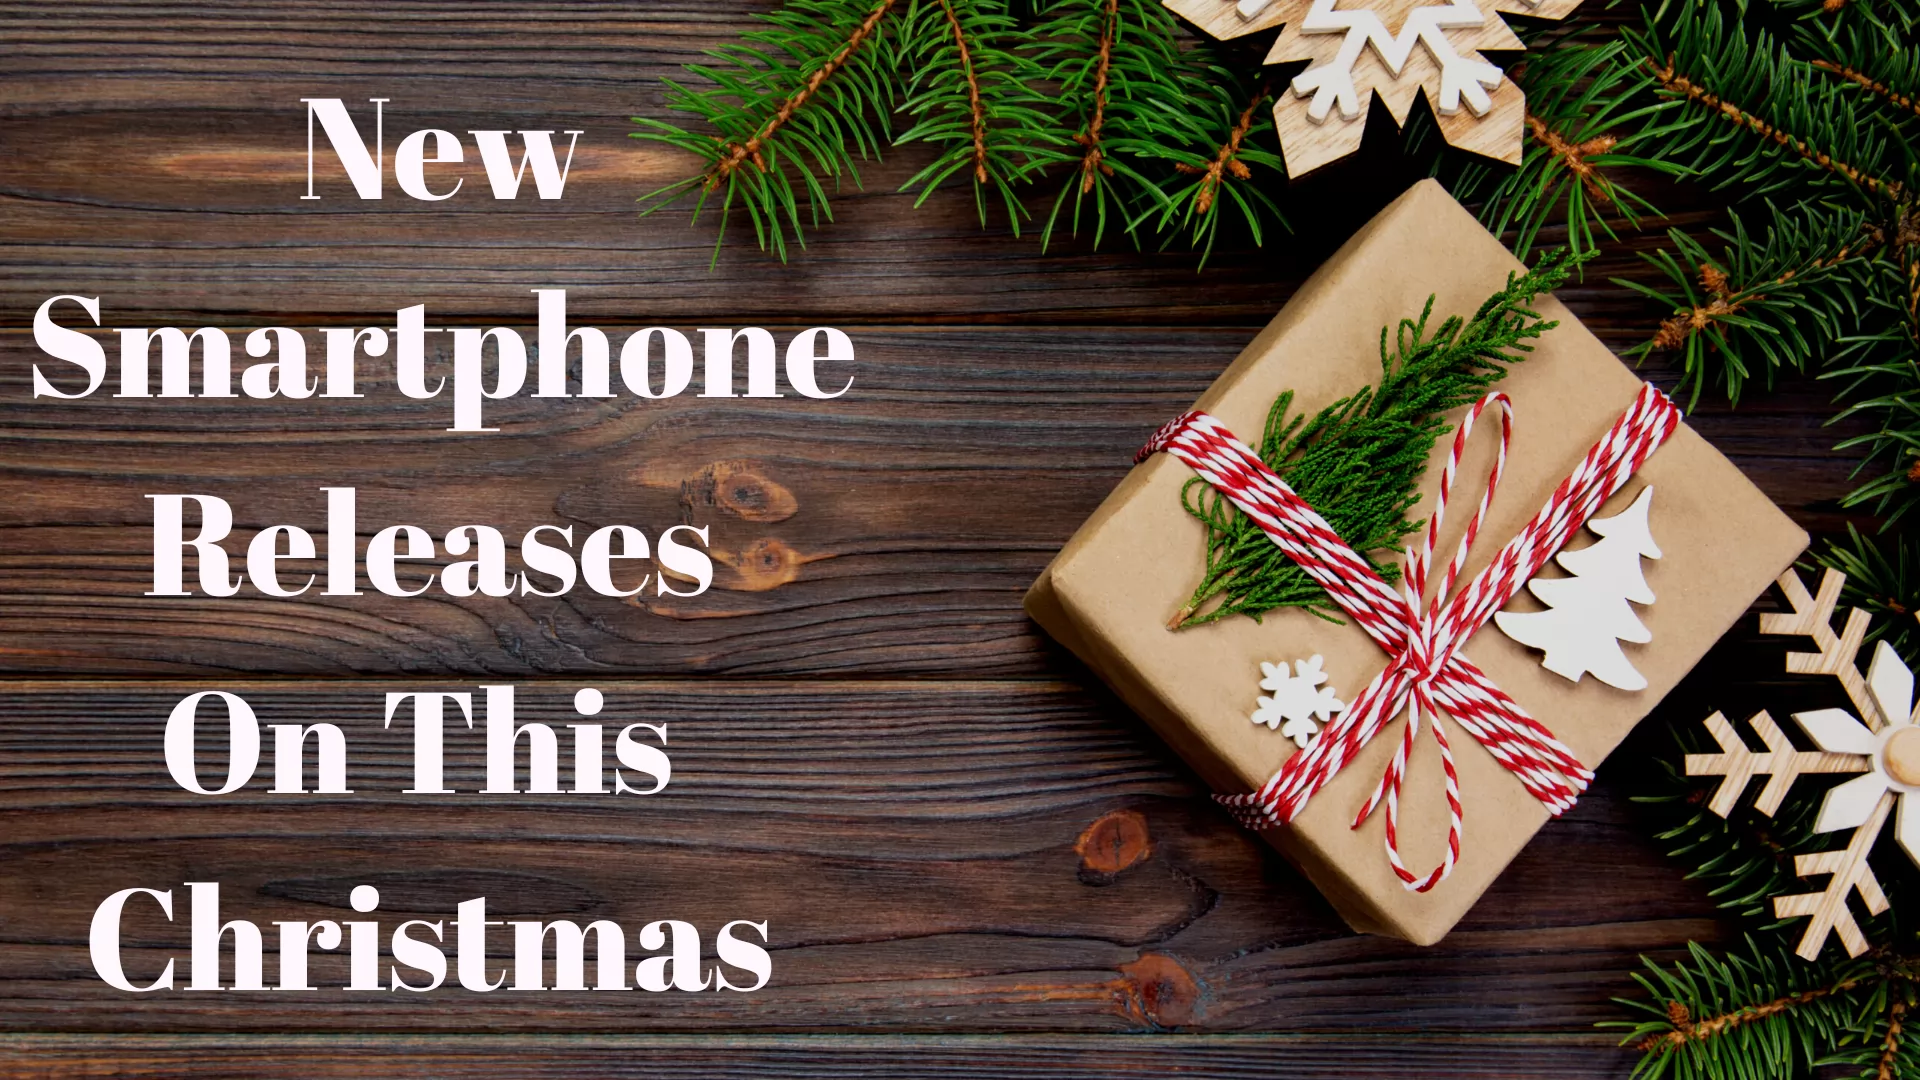 New Smartphone Releases On This Christmas